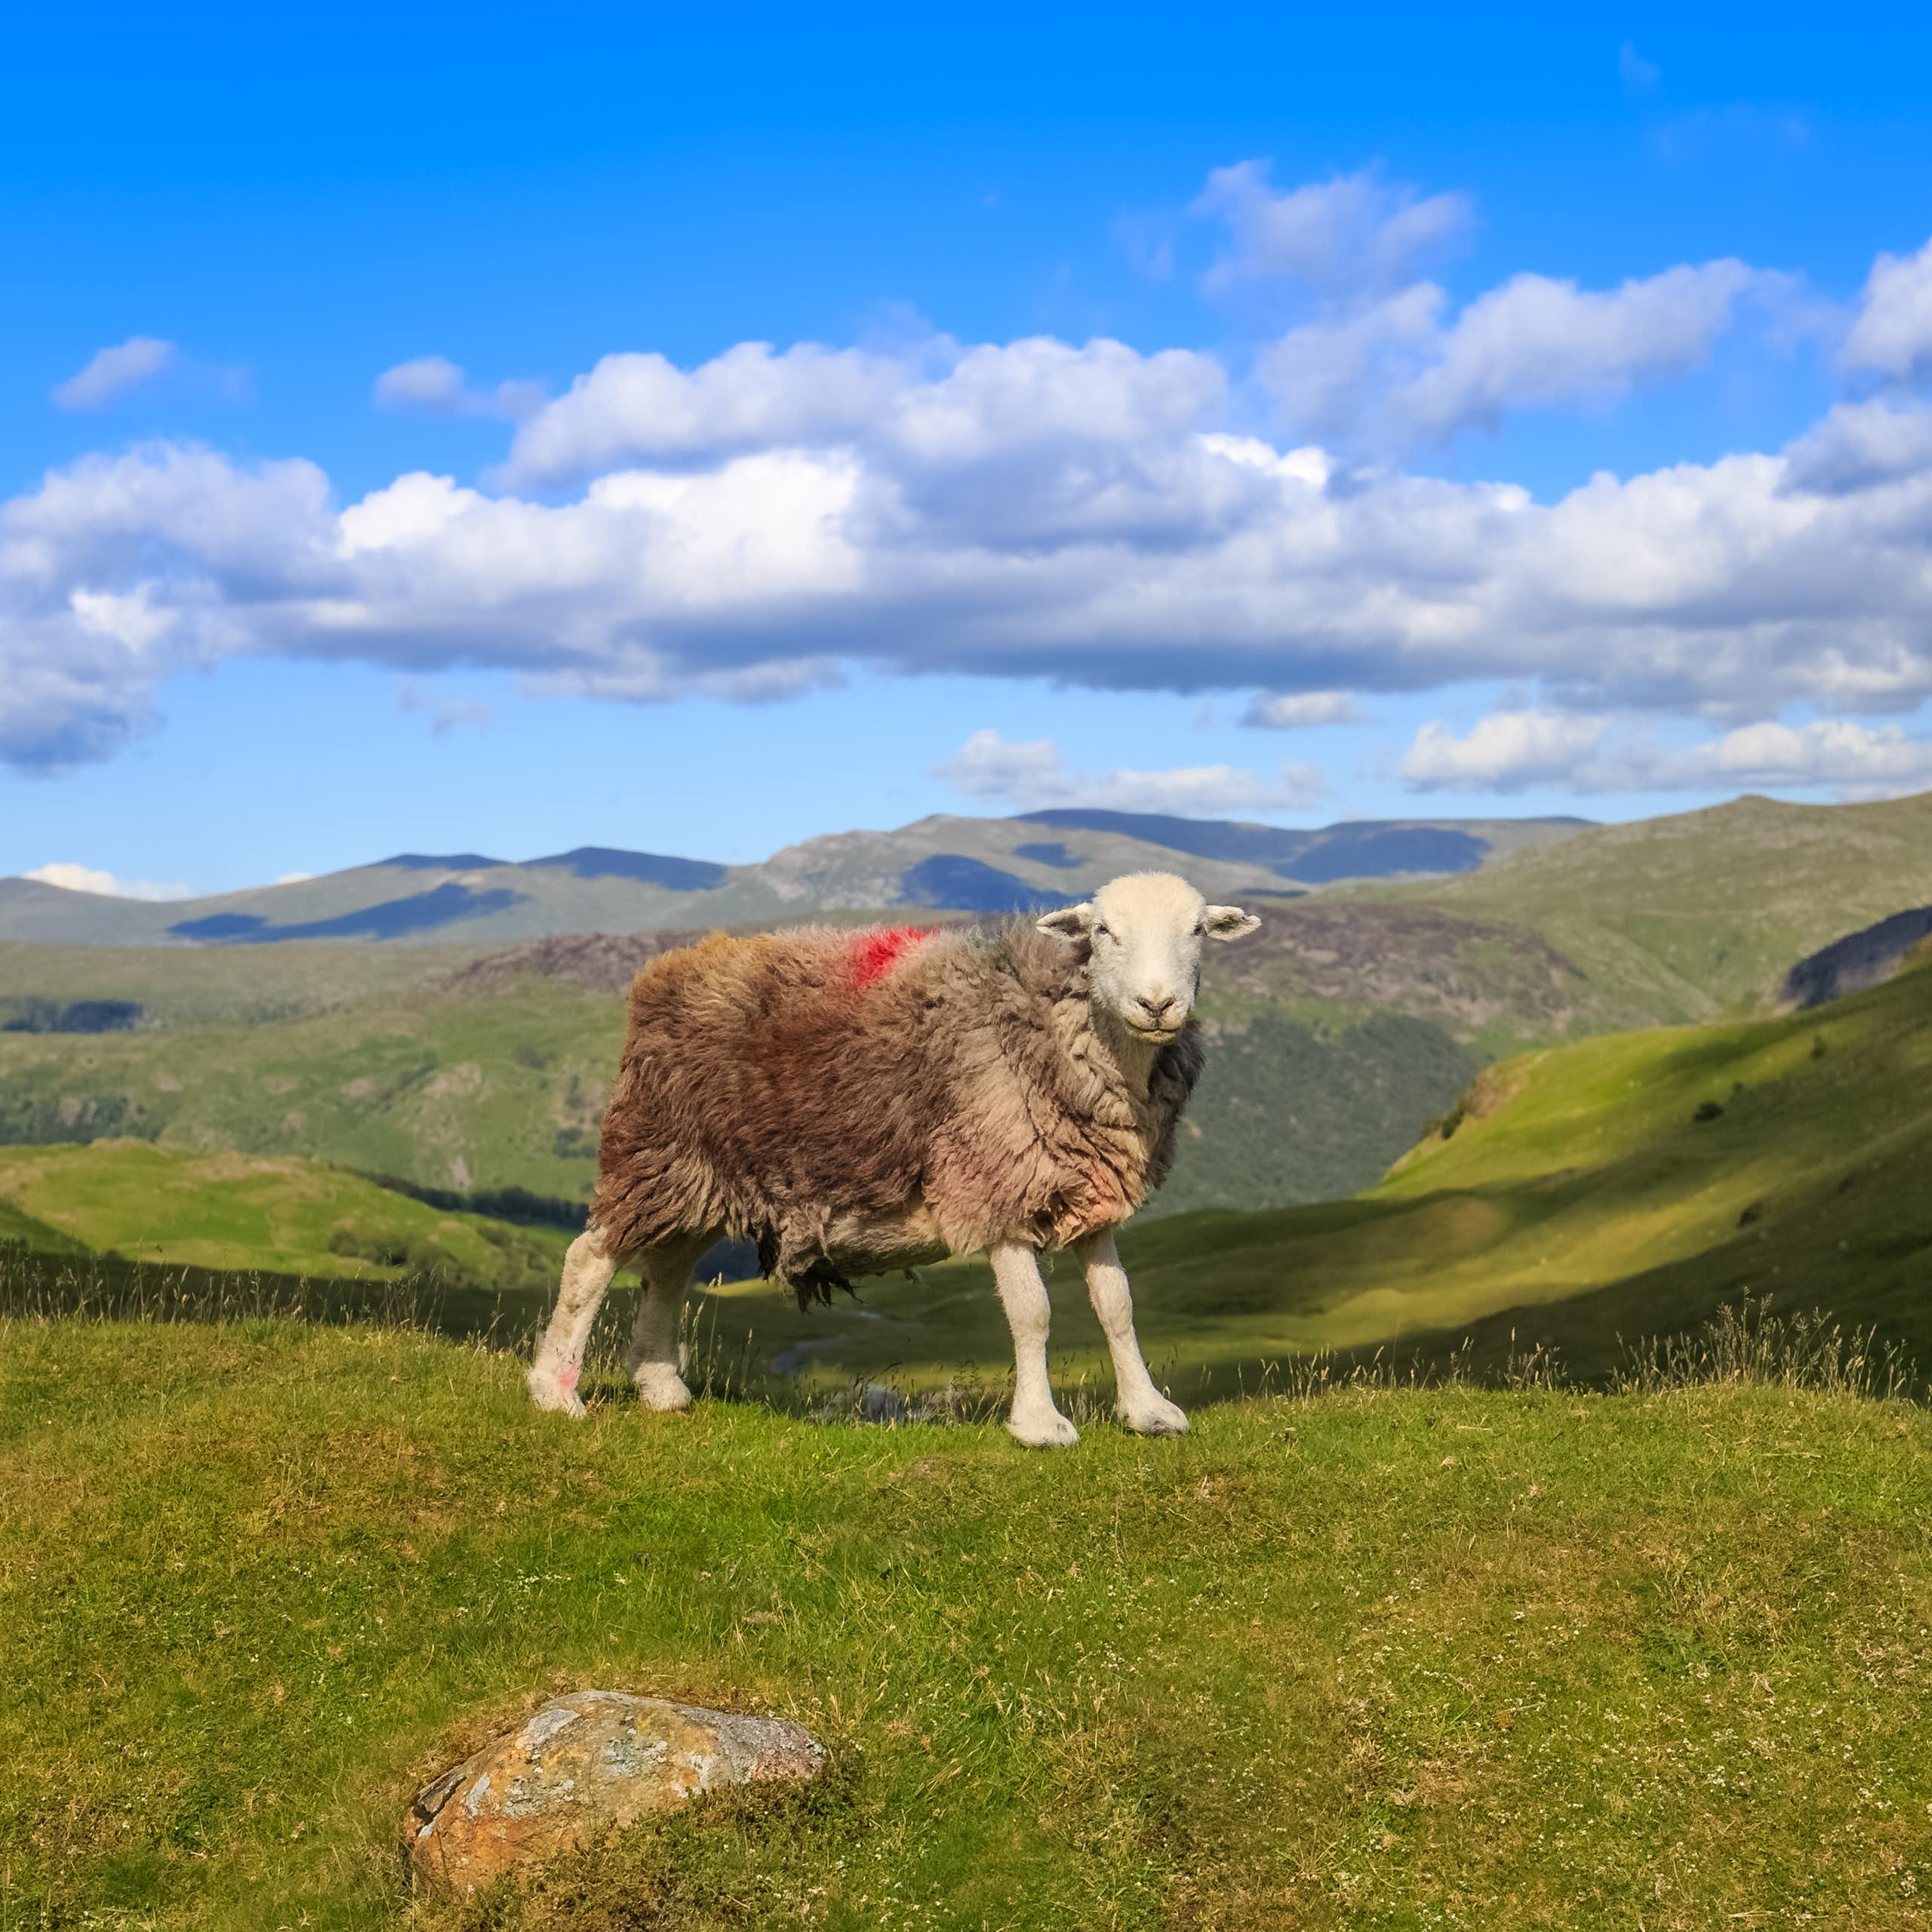 A sheep with hilly background.